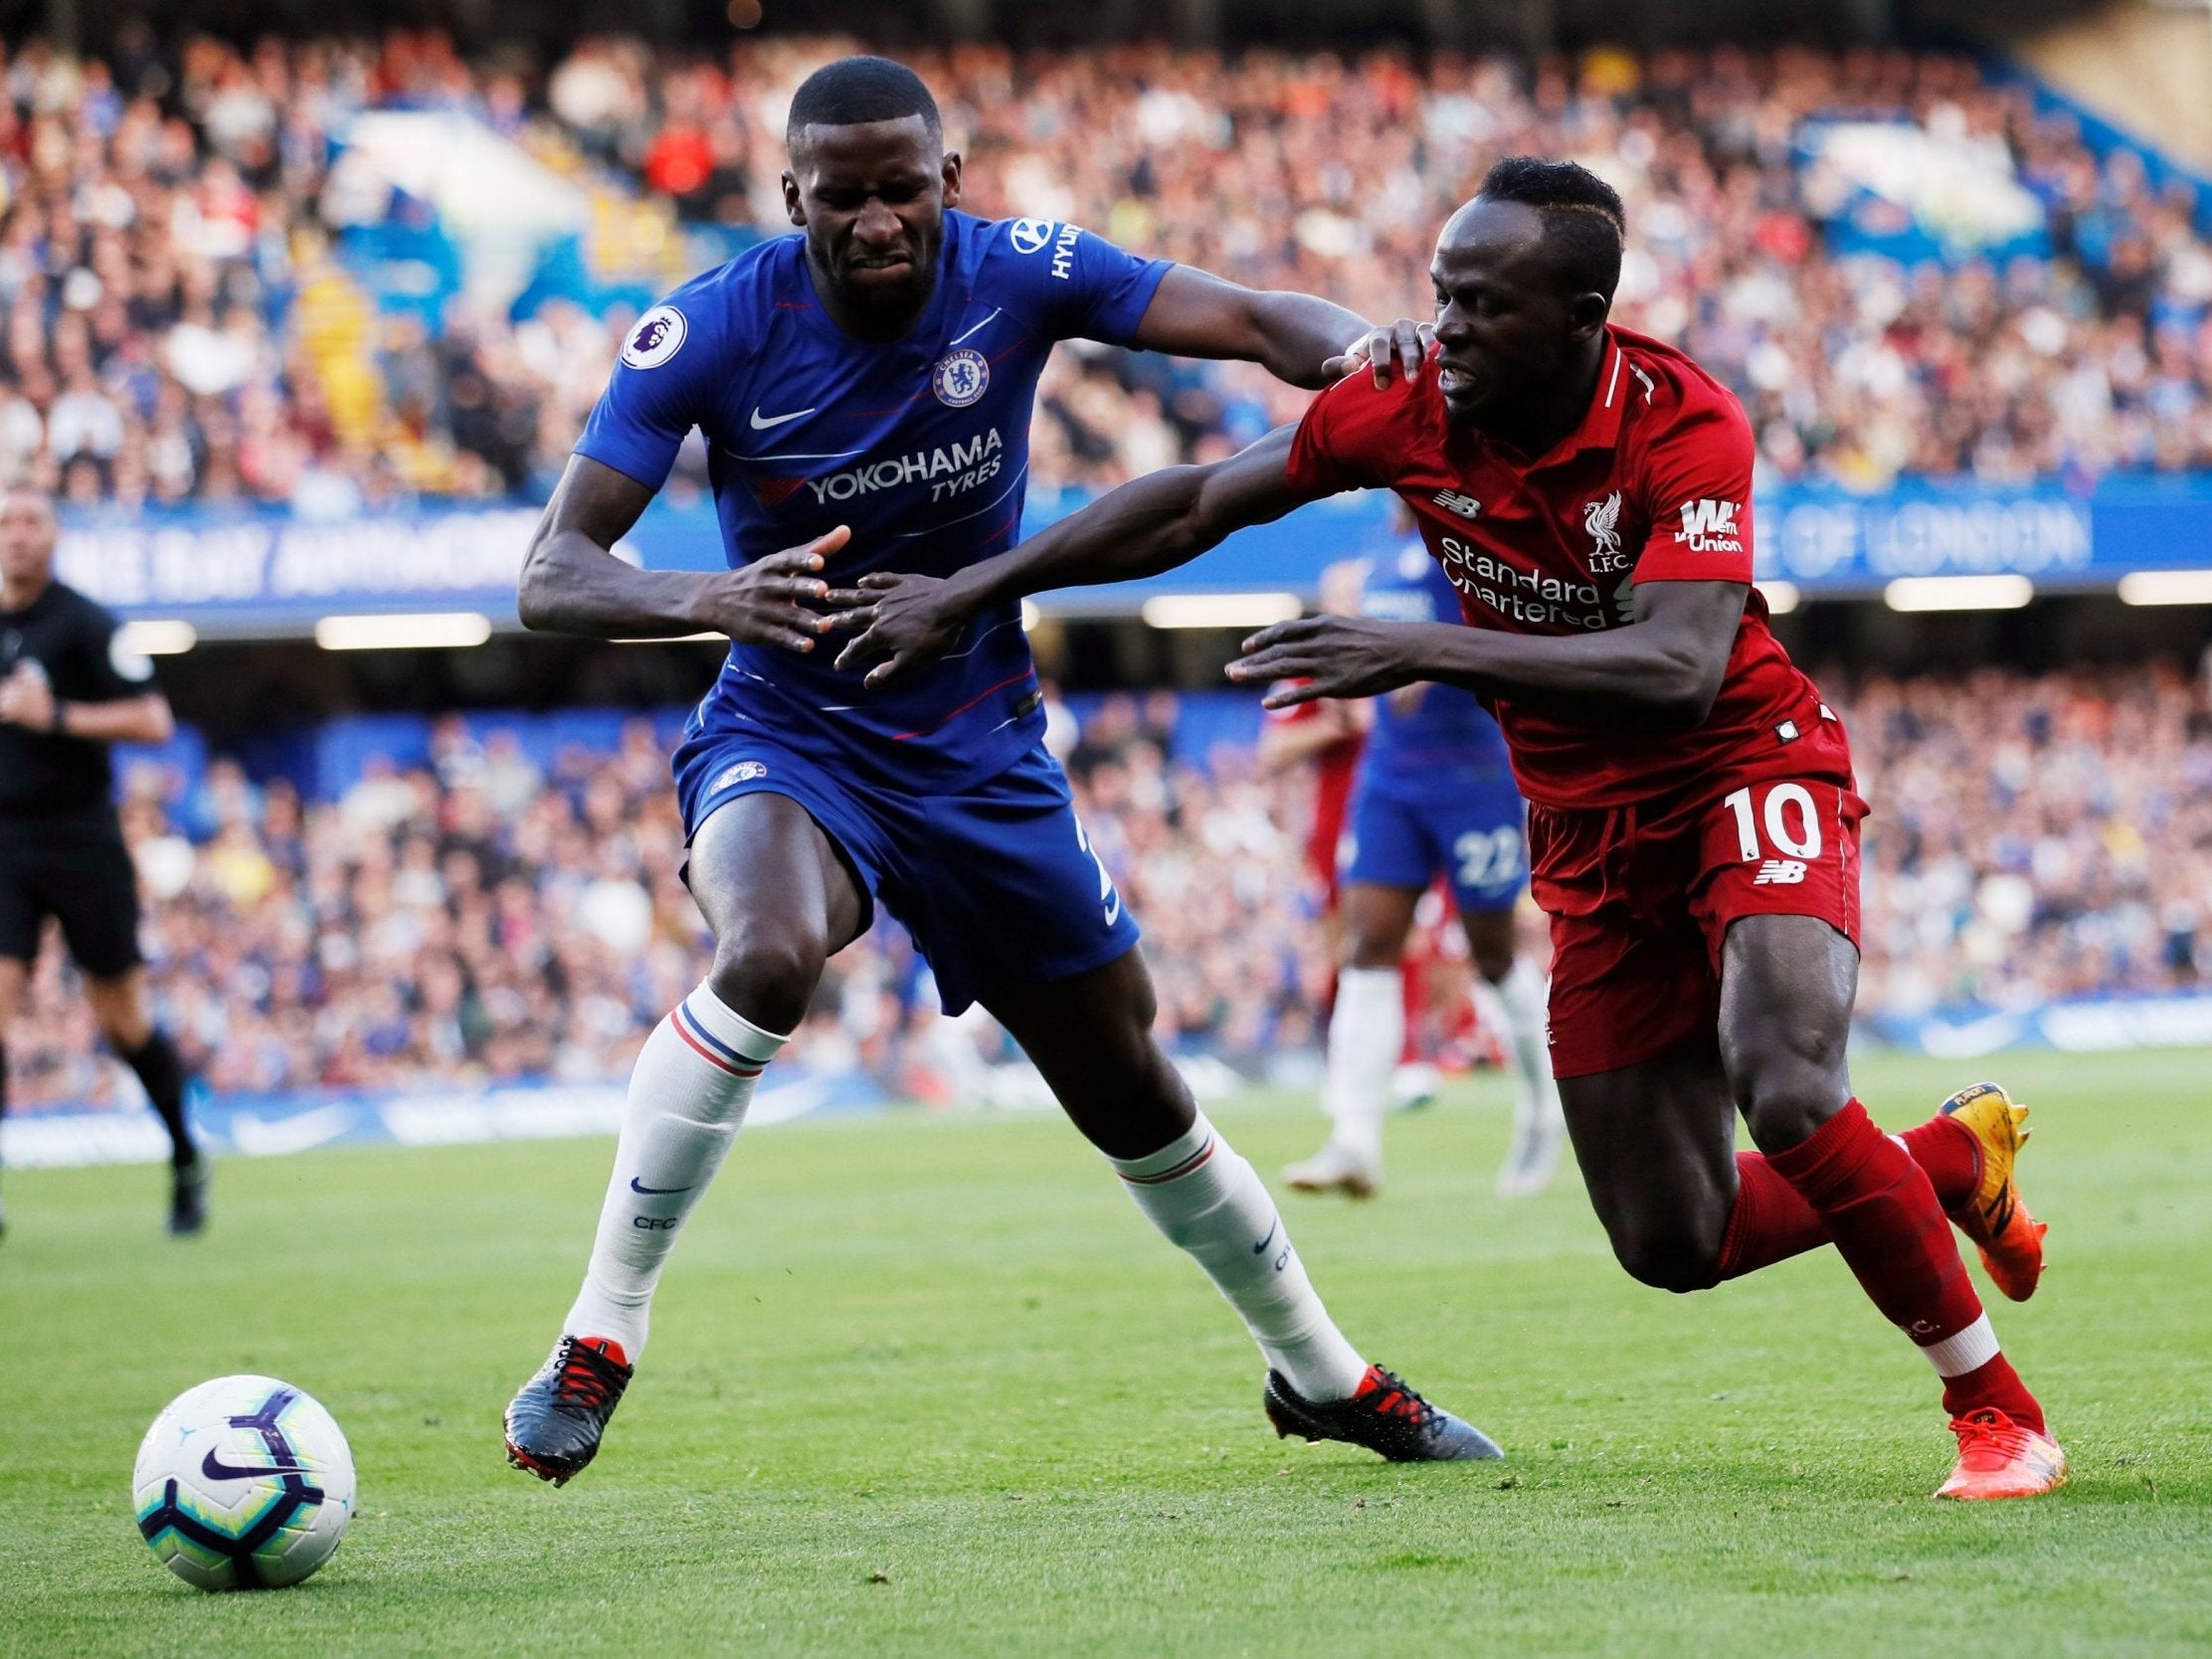 Chelsea vs Liverpool - LIVE: Latest score, goals and updates plus prediction, how to watch ...